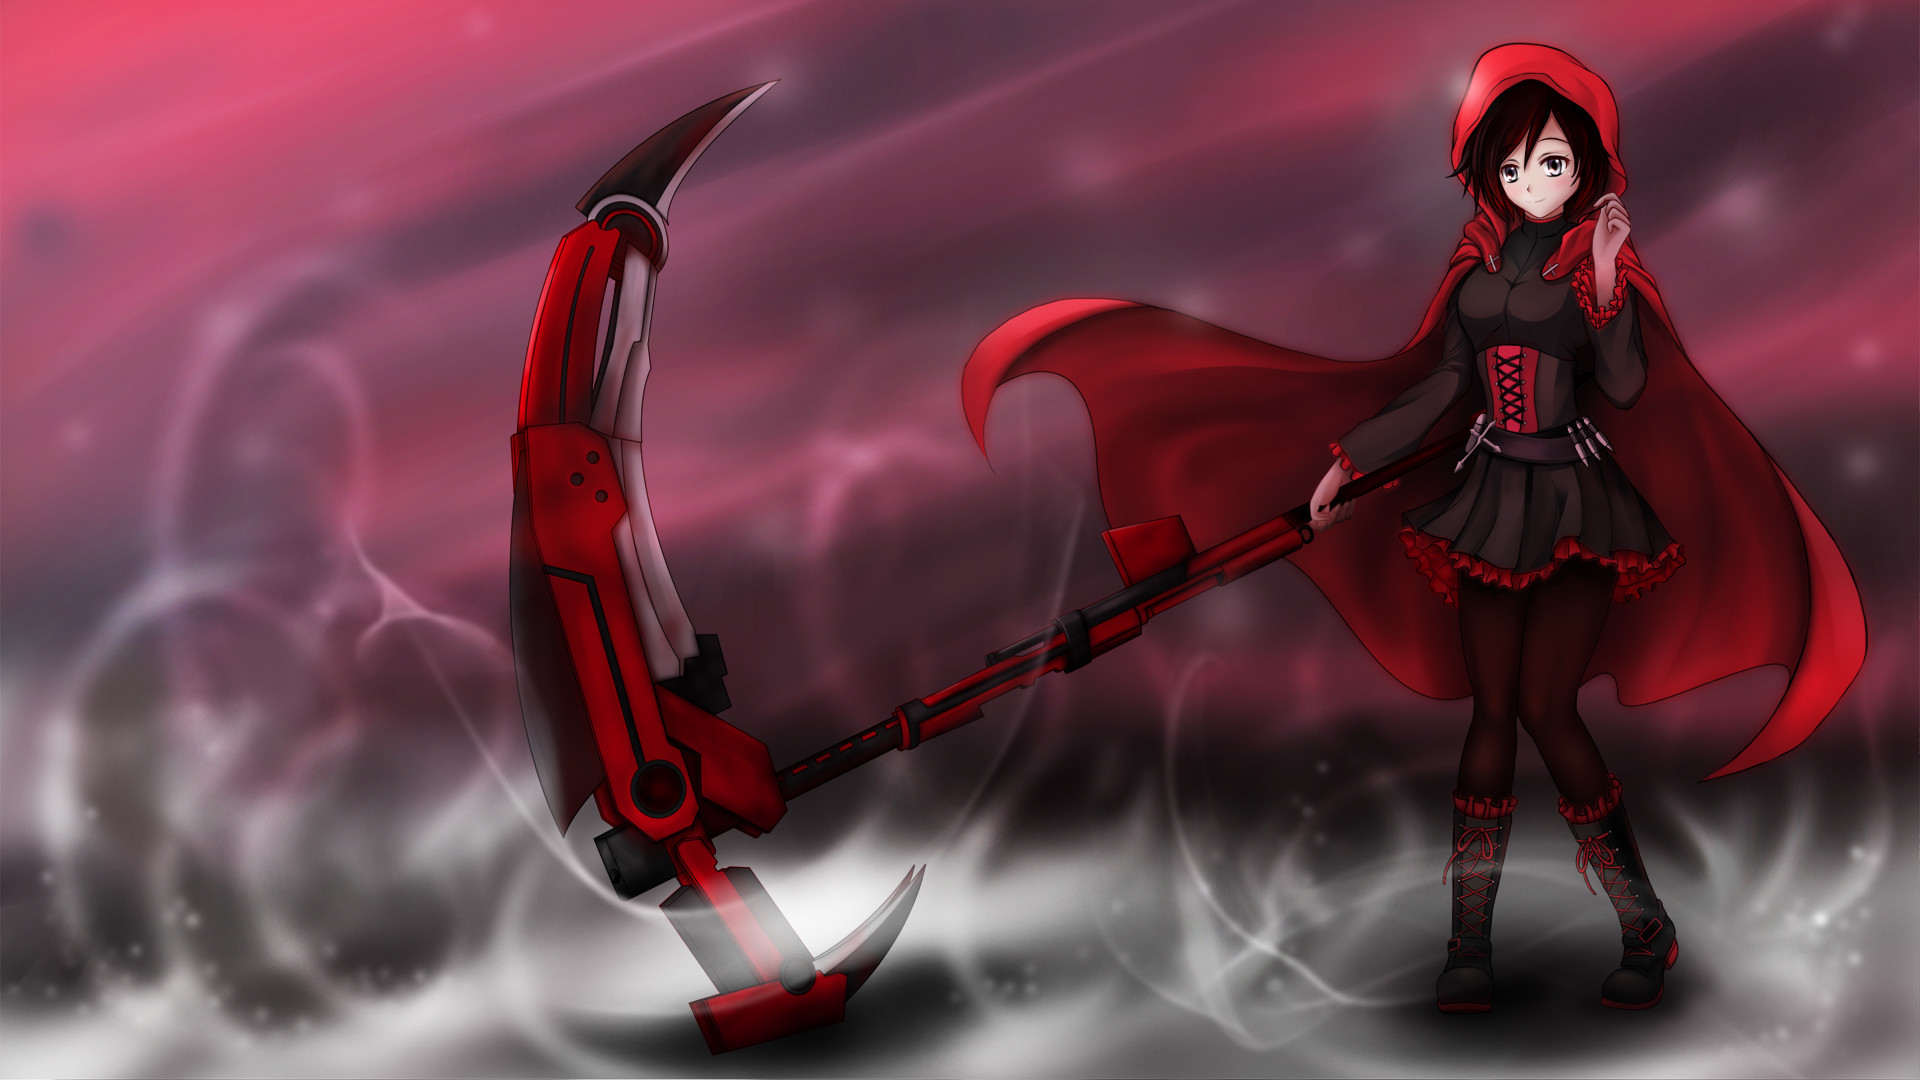 1920x1080 Showing Gallery For Ruby Rose Rwby Iphone Wallpaper